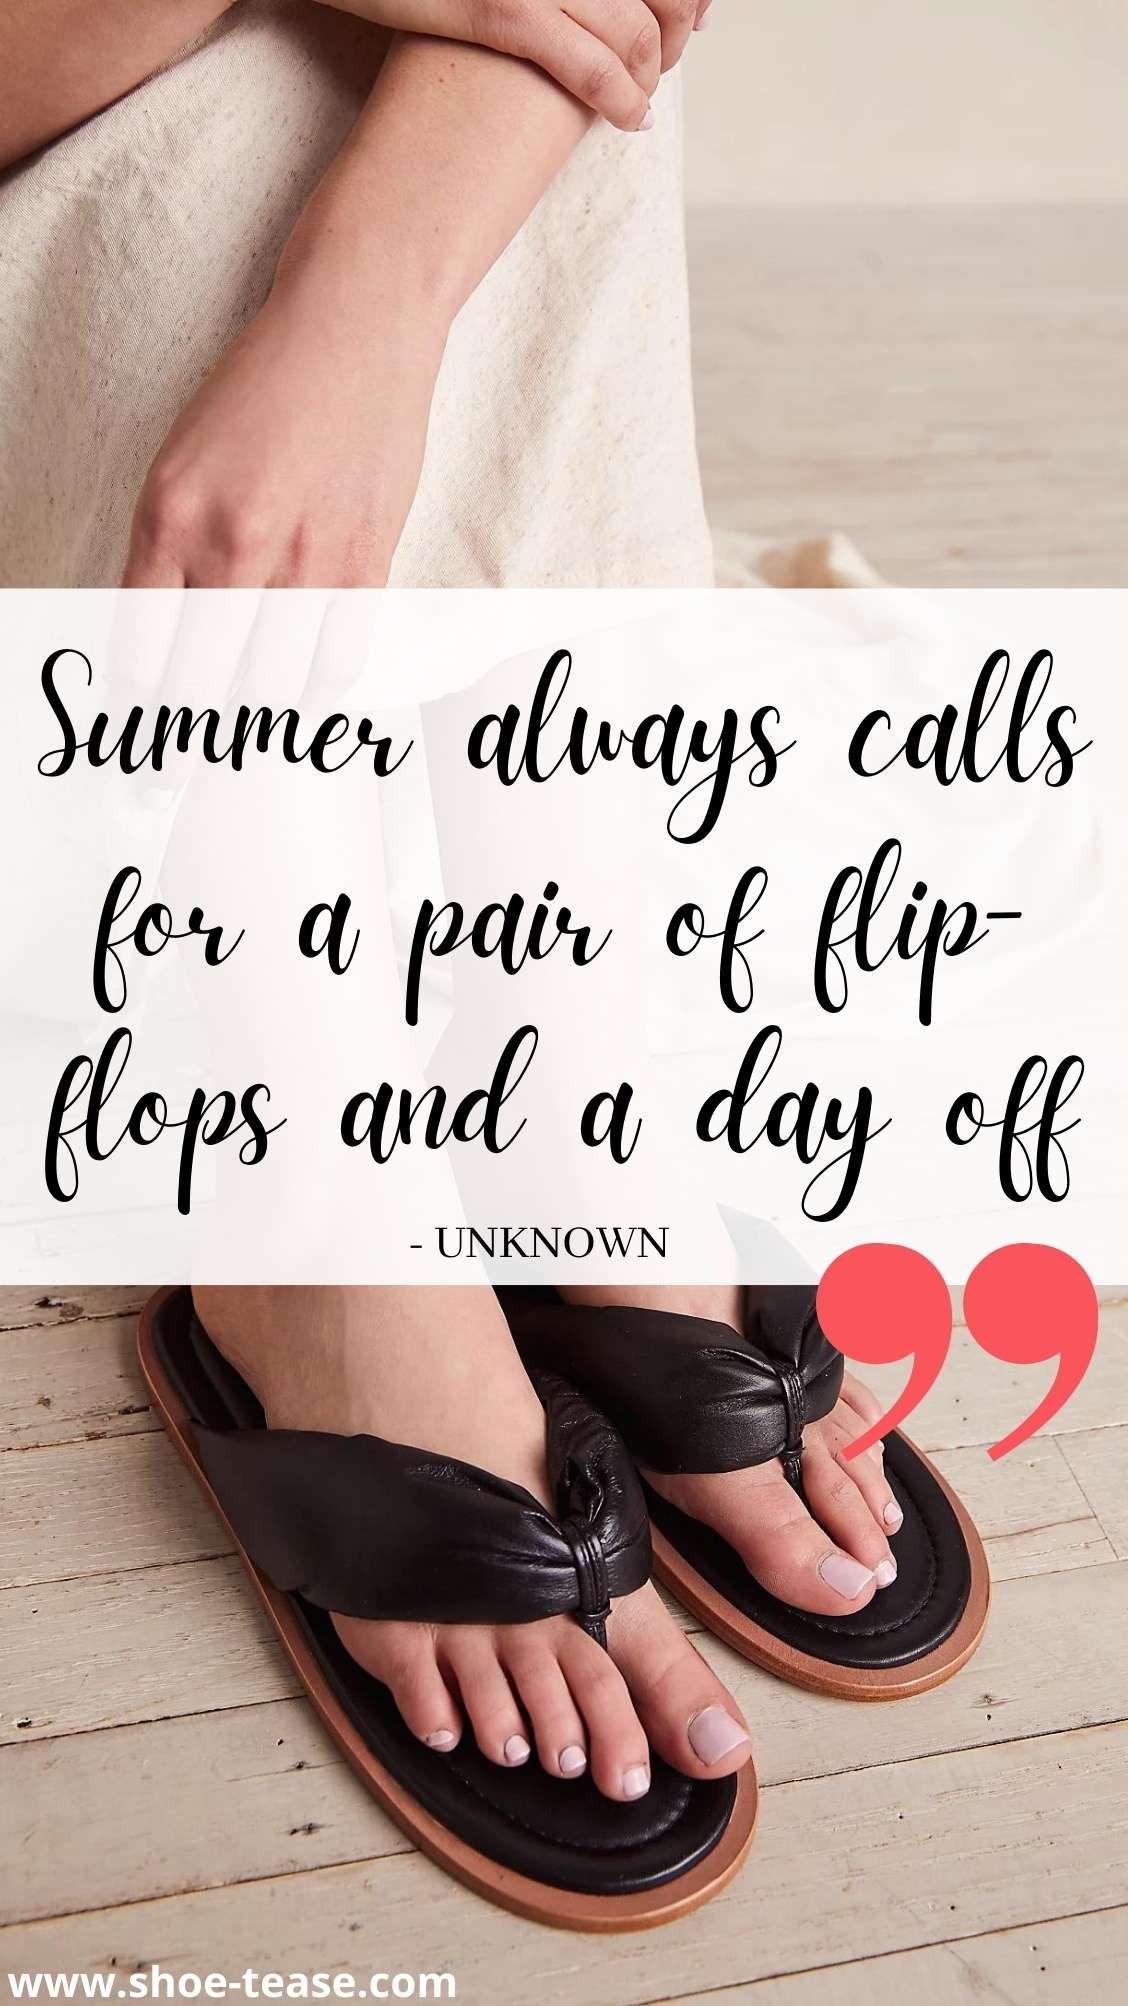 Flip flop quote reading summer always calls for a pair of flip flops and a day off unknown.